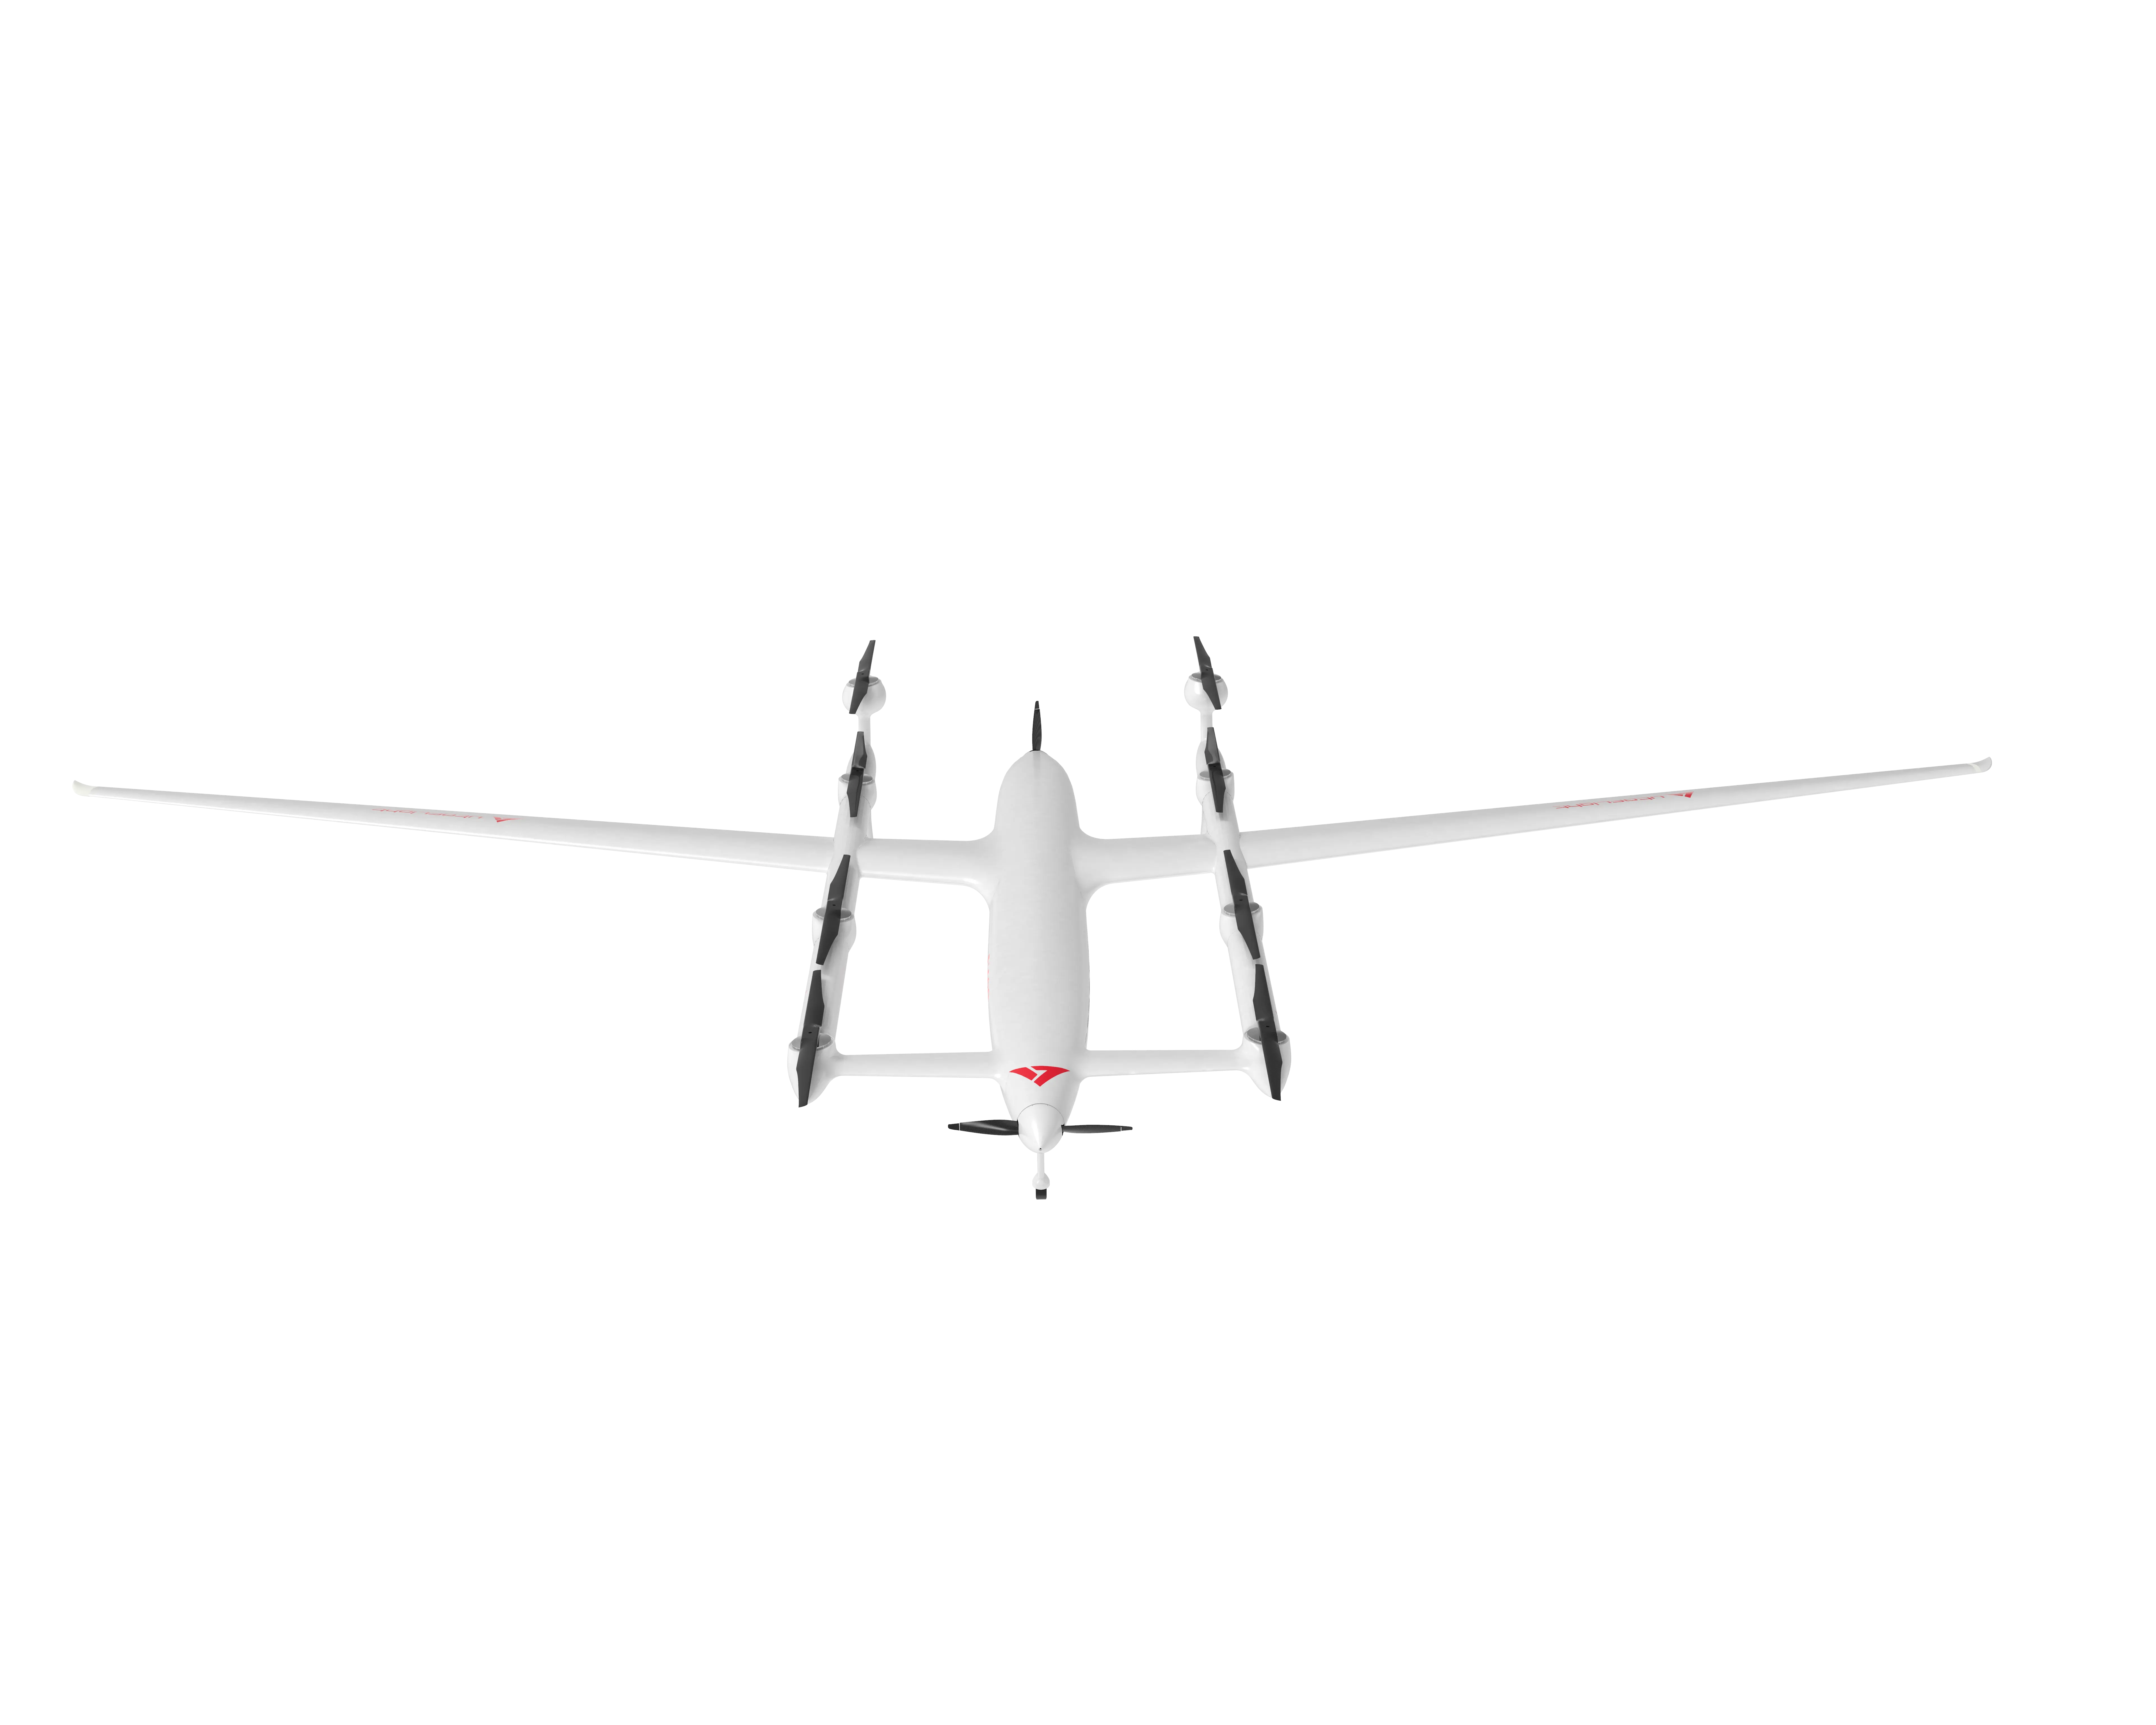 Ultra-high load, heavy-duty pure electric/hybrid 100KG payload vertical take-off and landing fixed wing